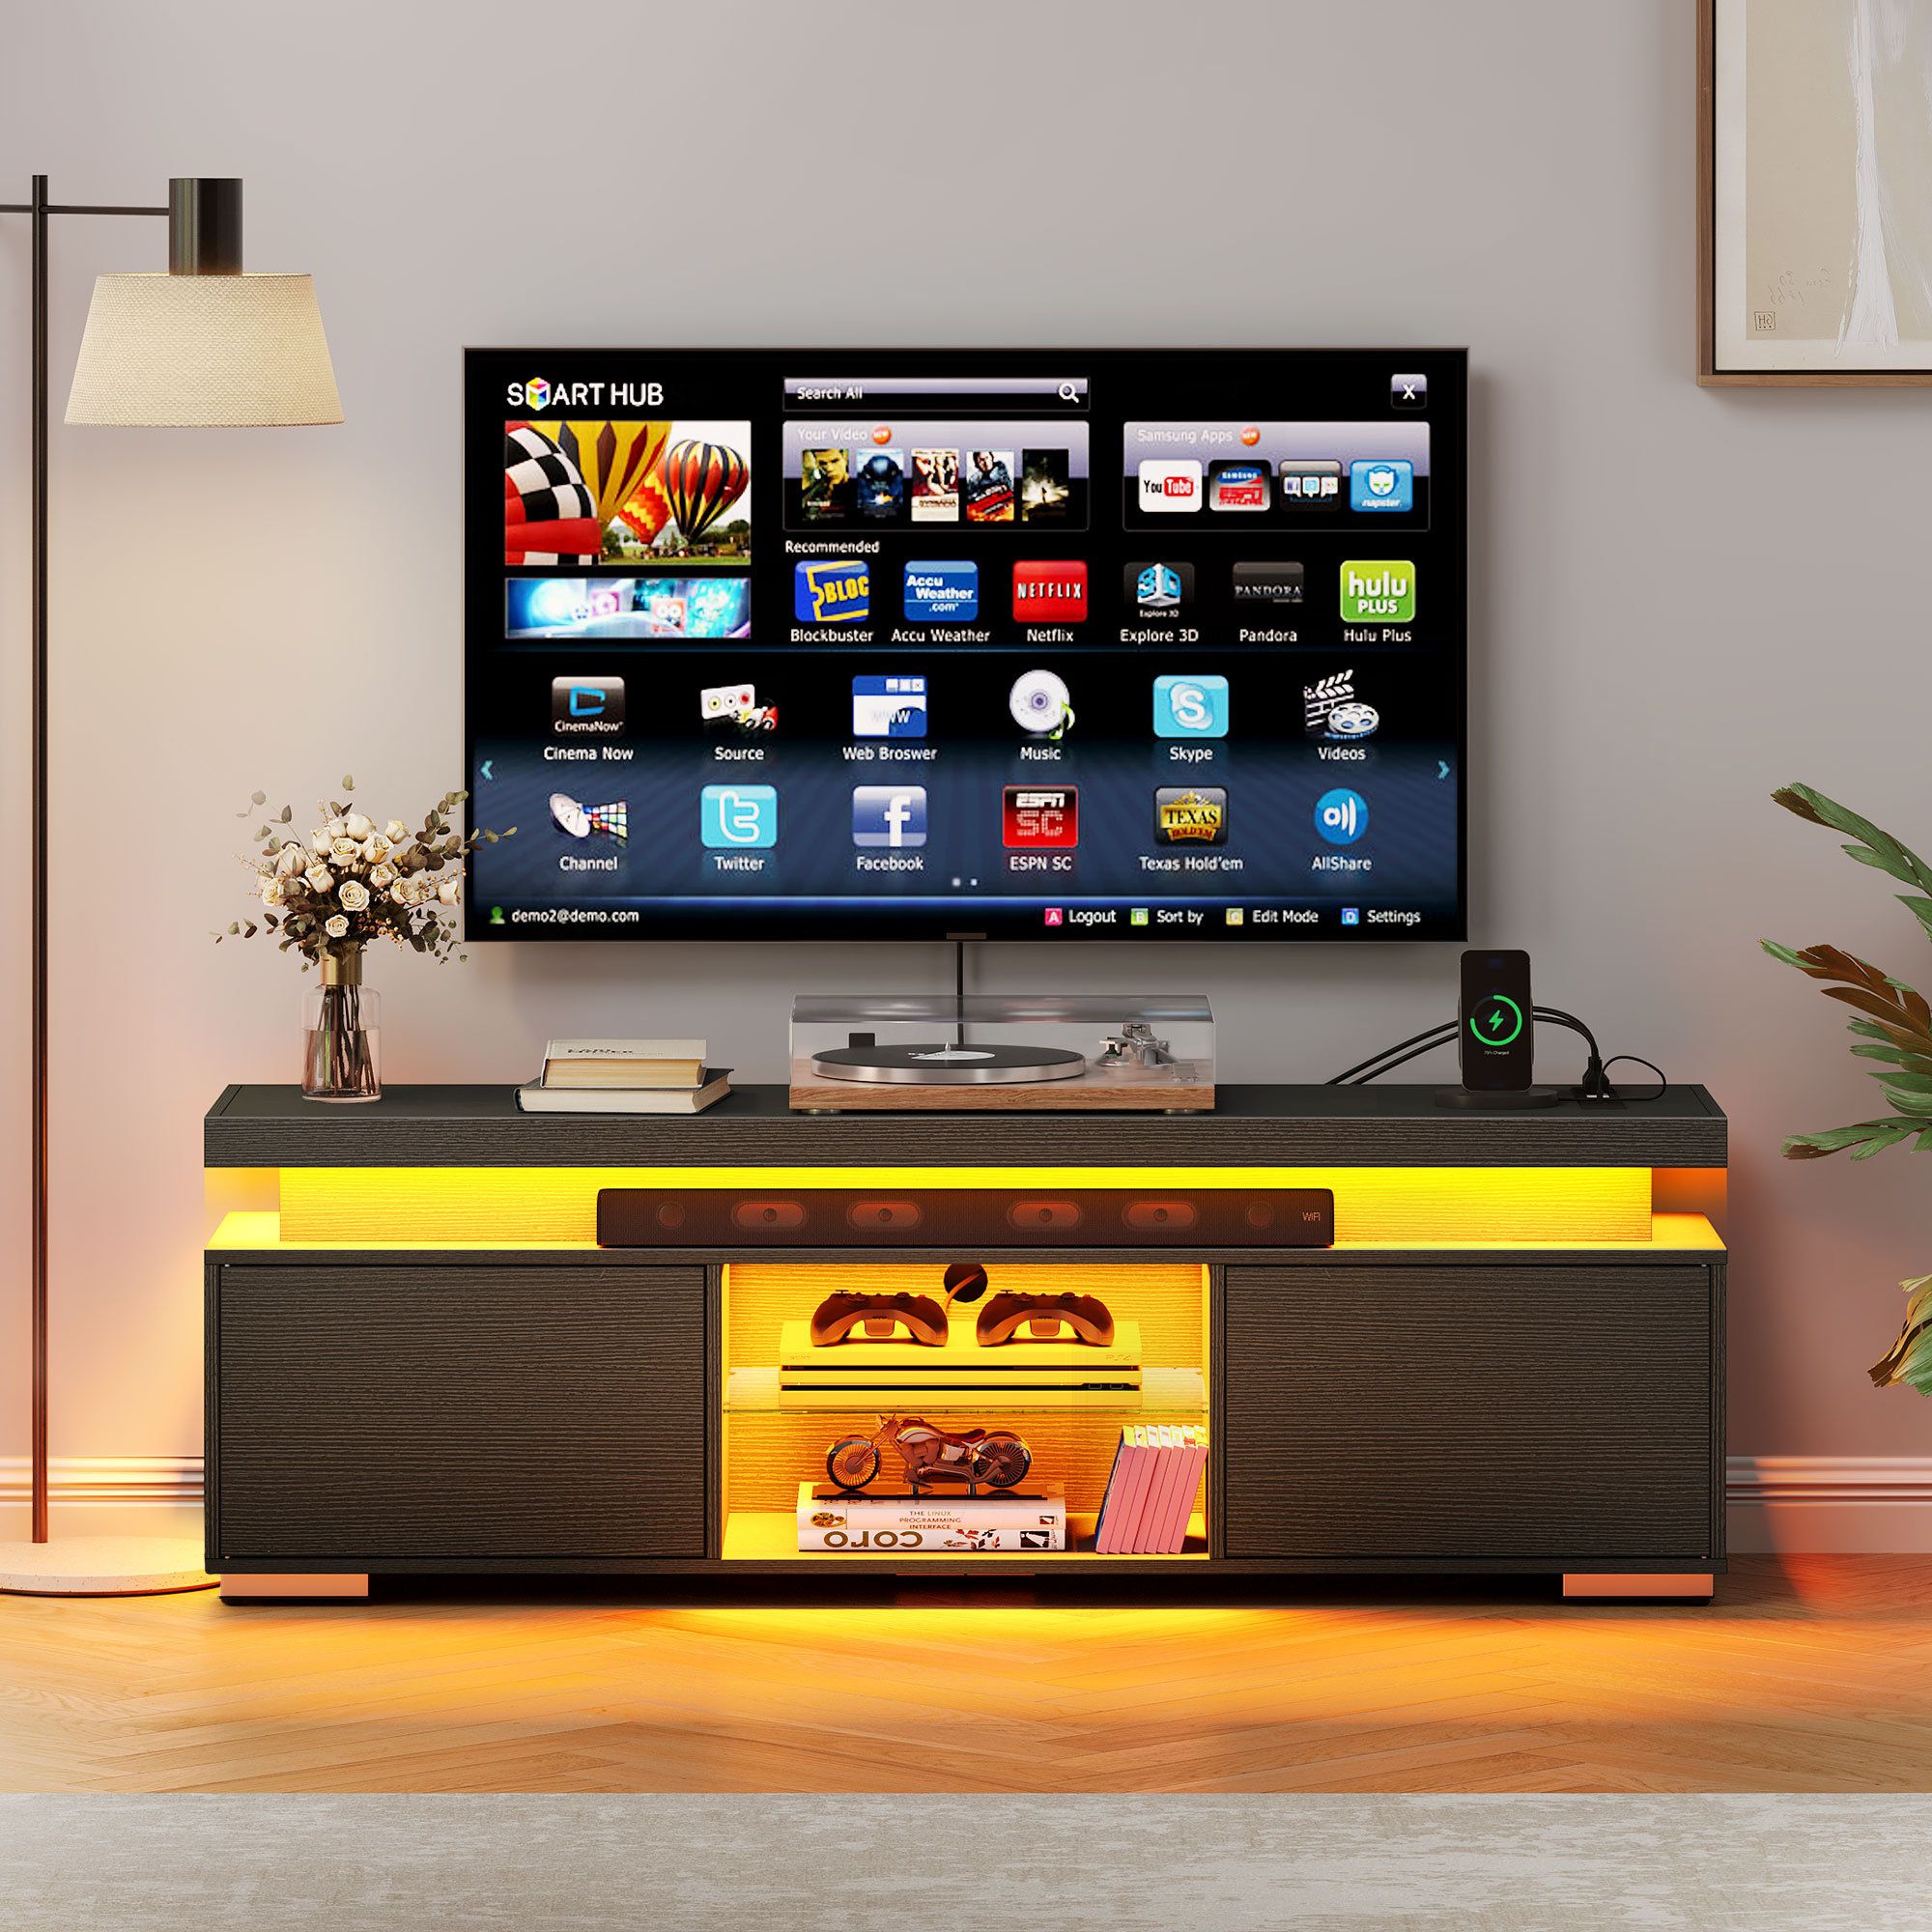 Ebern Designs Eldwon Led Tv Stand With Cabinet And Power Outlet For Tvs Up  To 65" | Wayfair Throughout Led Tv Stands With Outlet (View 13 of 15)